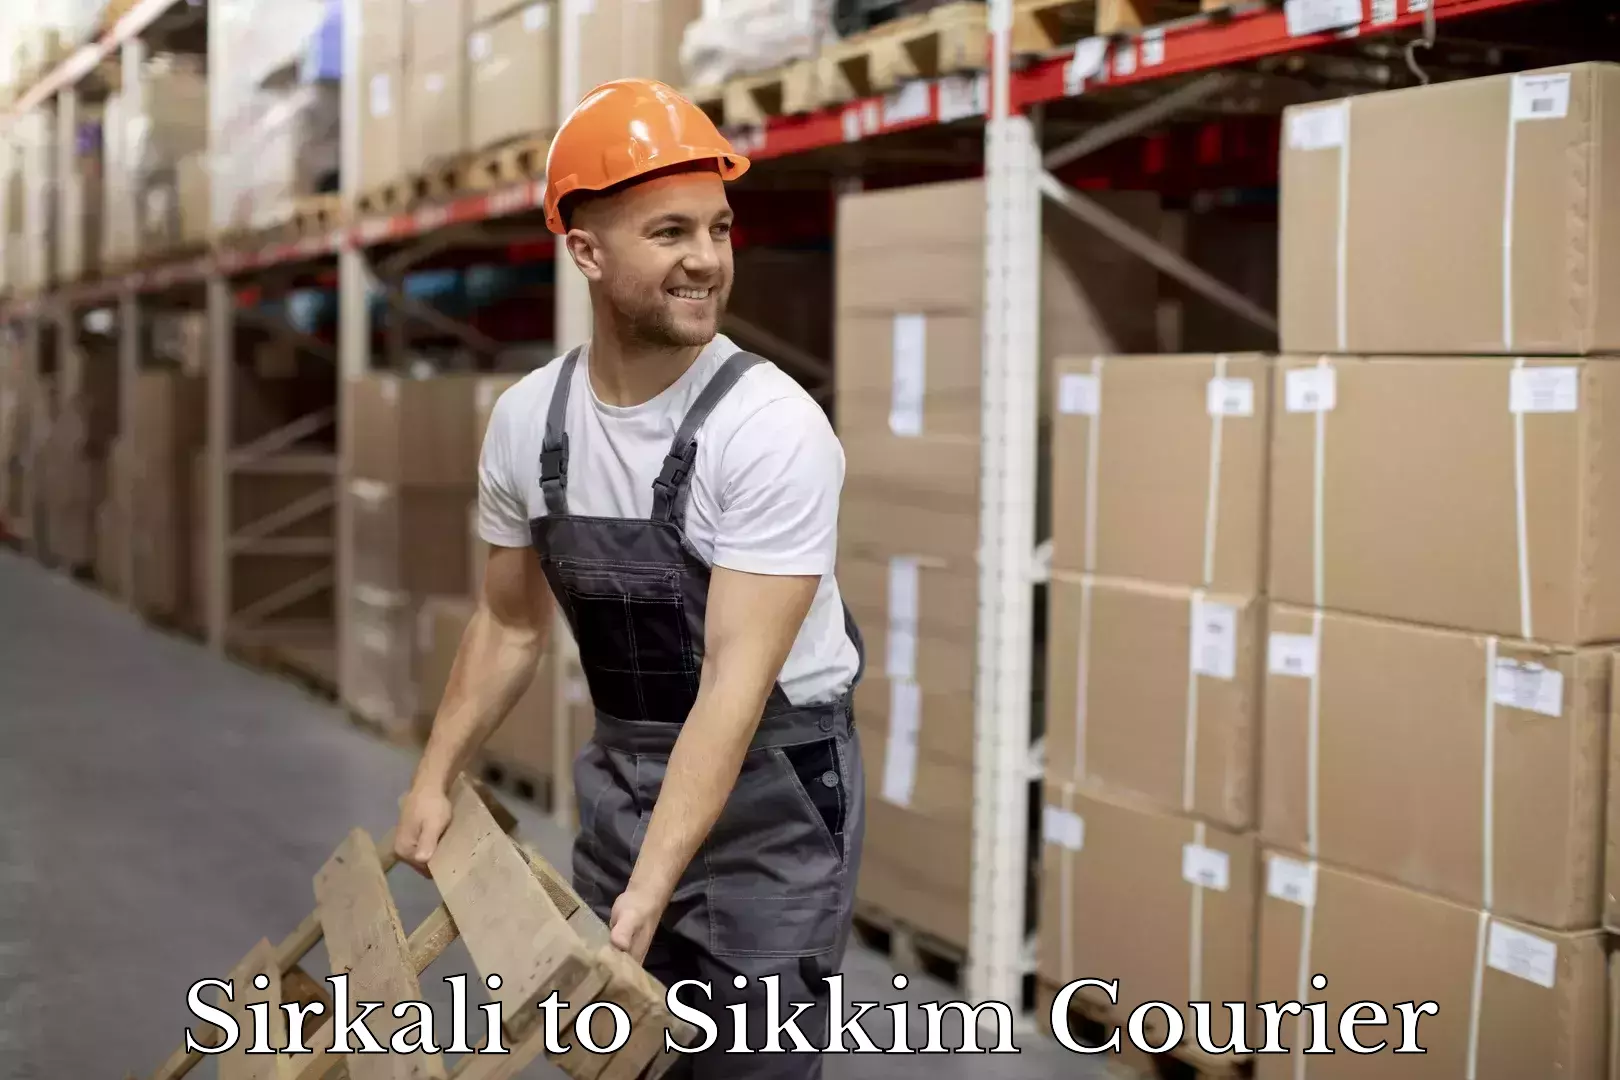 Delivery service partnership in Sirkali to Sikkim